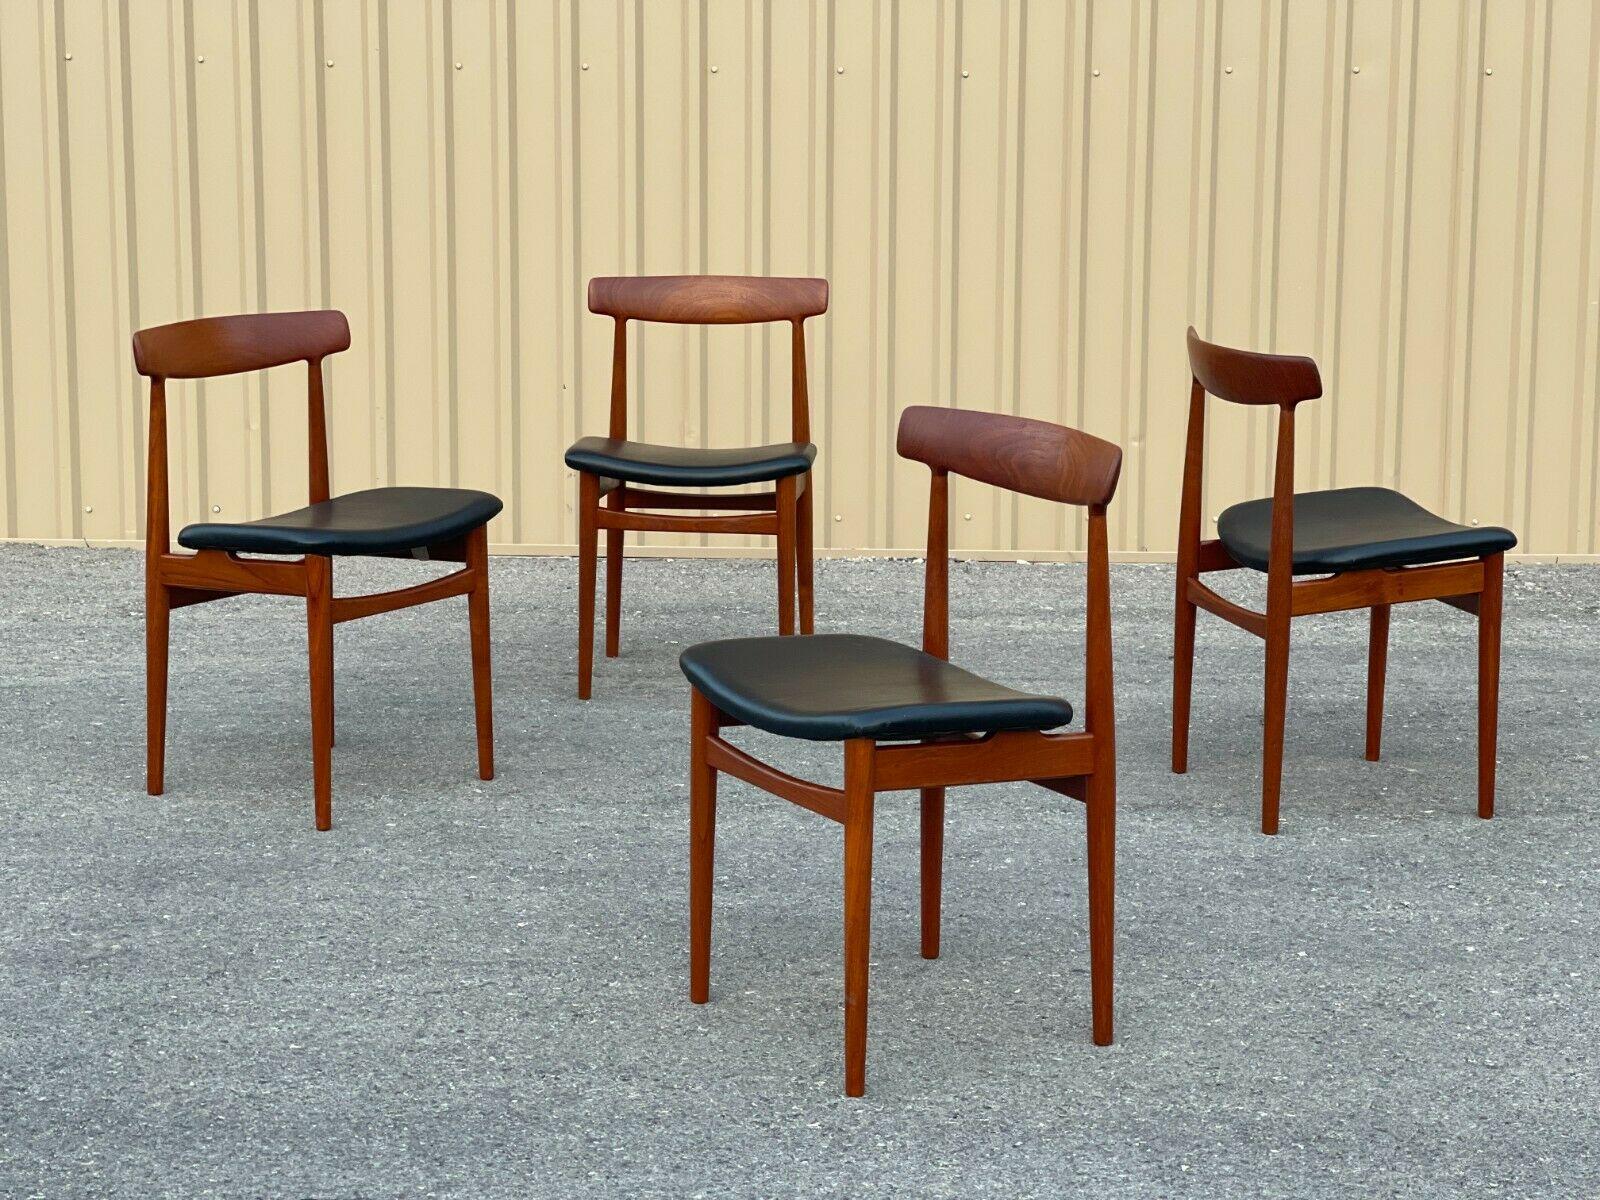 Very rare and sought after 1960's Designed by Frederik Kayser for Viken Møbelfabrikk. Model 119 teak dinning chairs.

Set of 4 

Chairs have been refinished. One chair shows repair pictured.

Seat height 18.5 high 15 inches deep 18 1/4 wide.